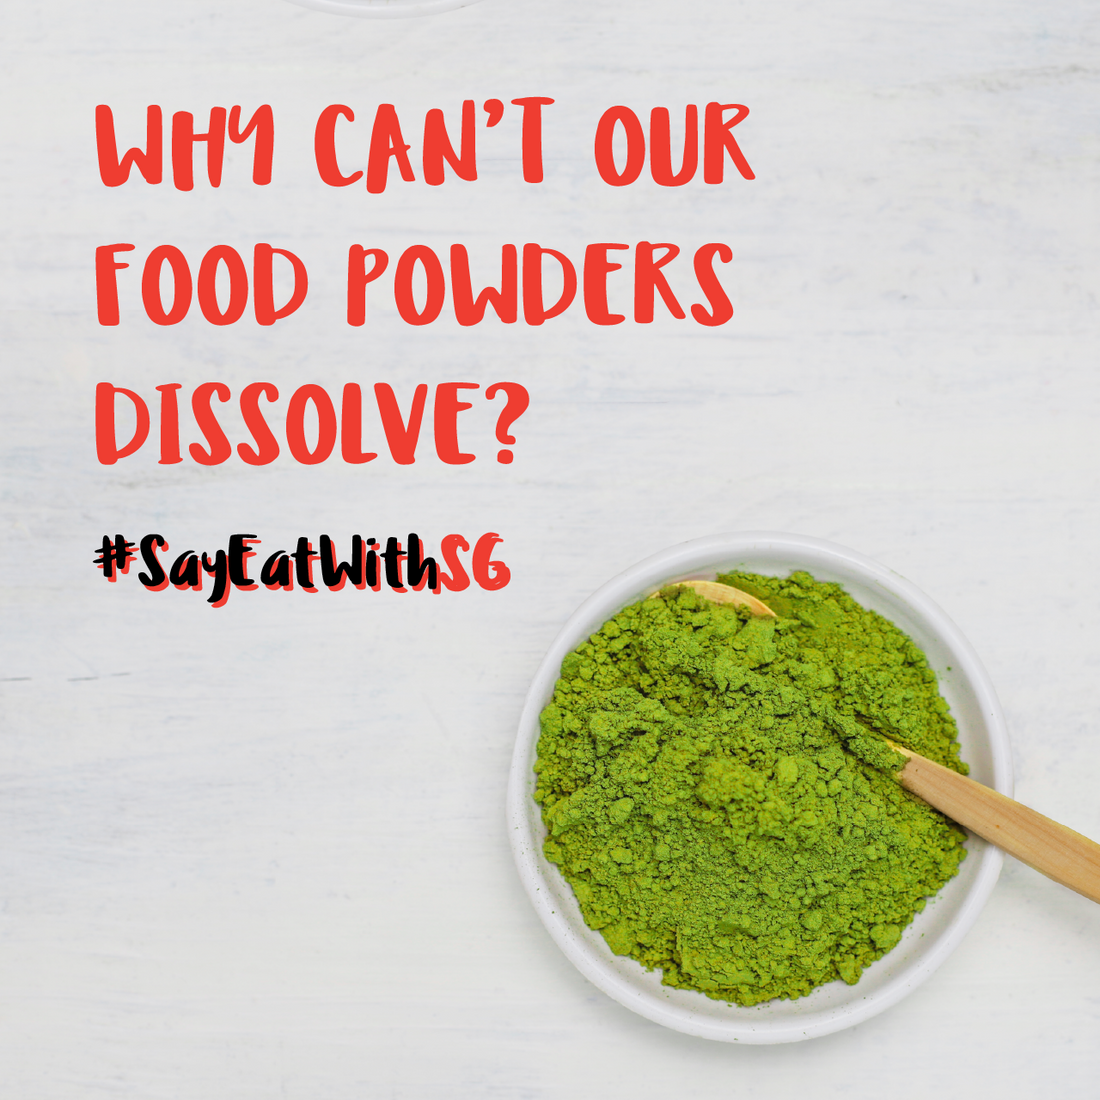 Why Can't Food Powders Dissolve?